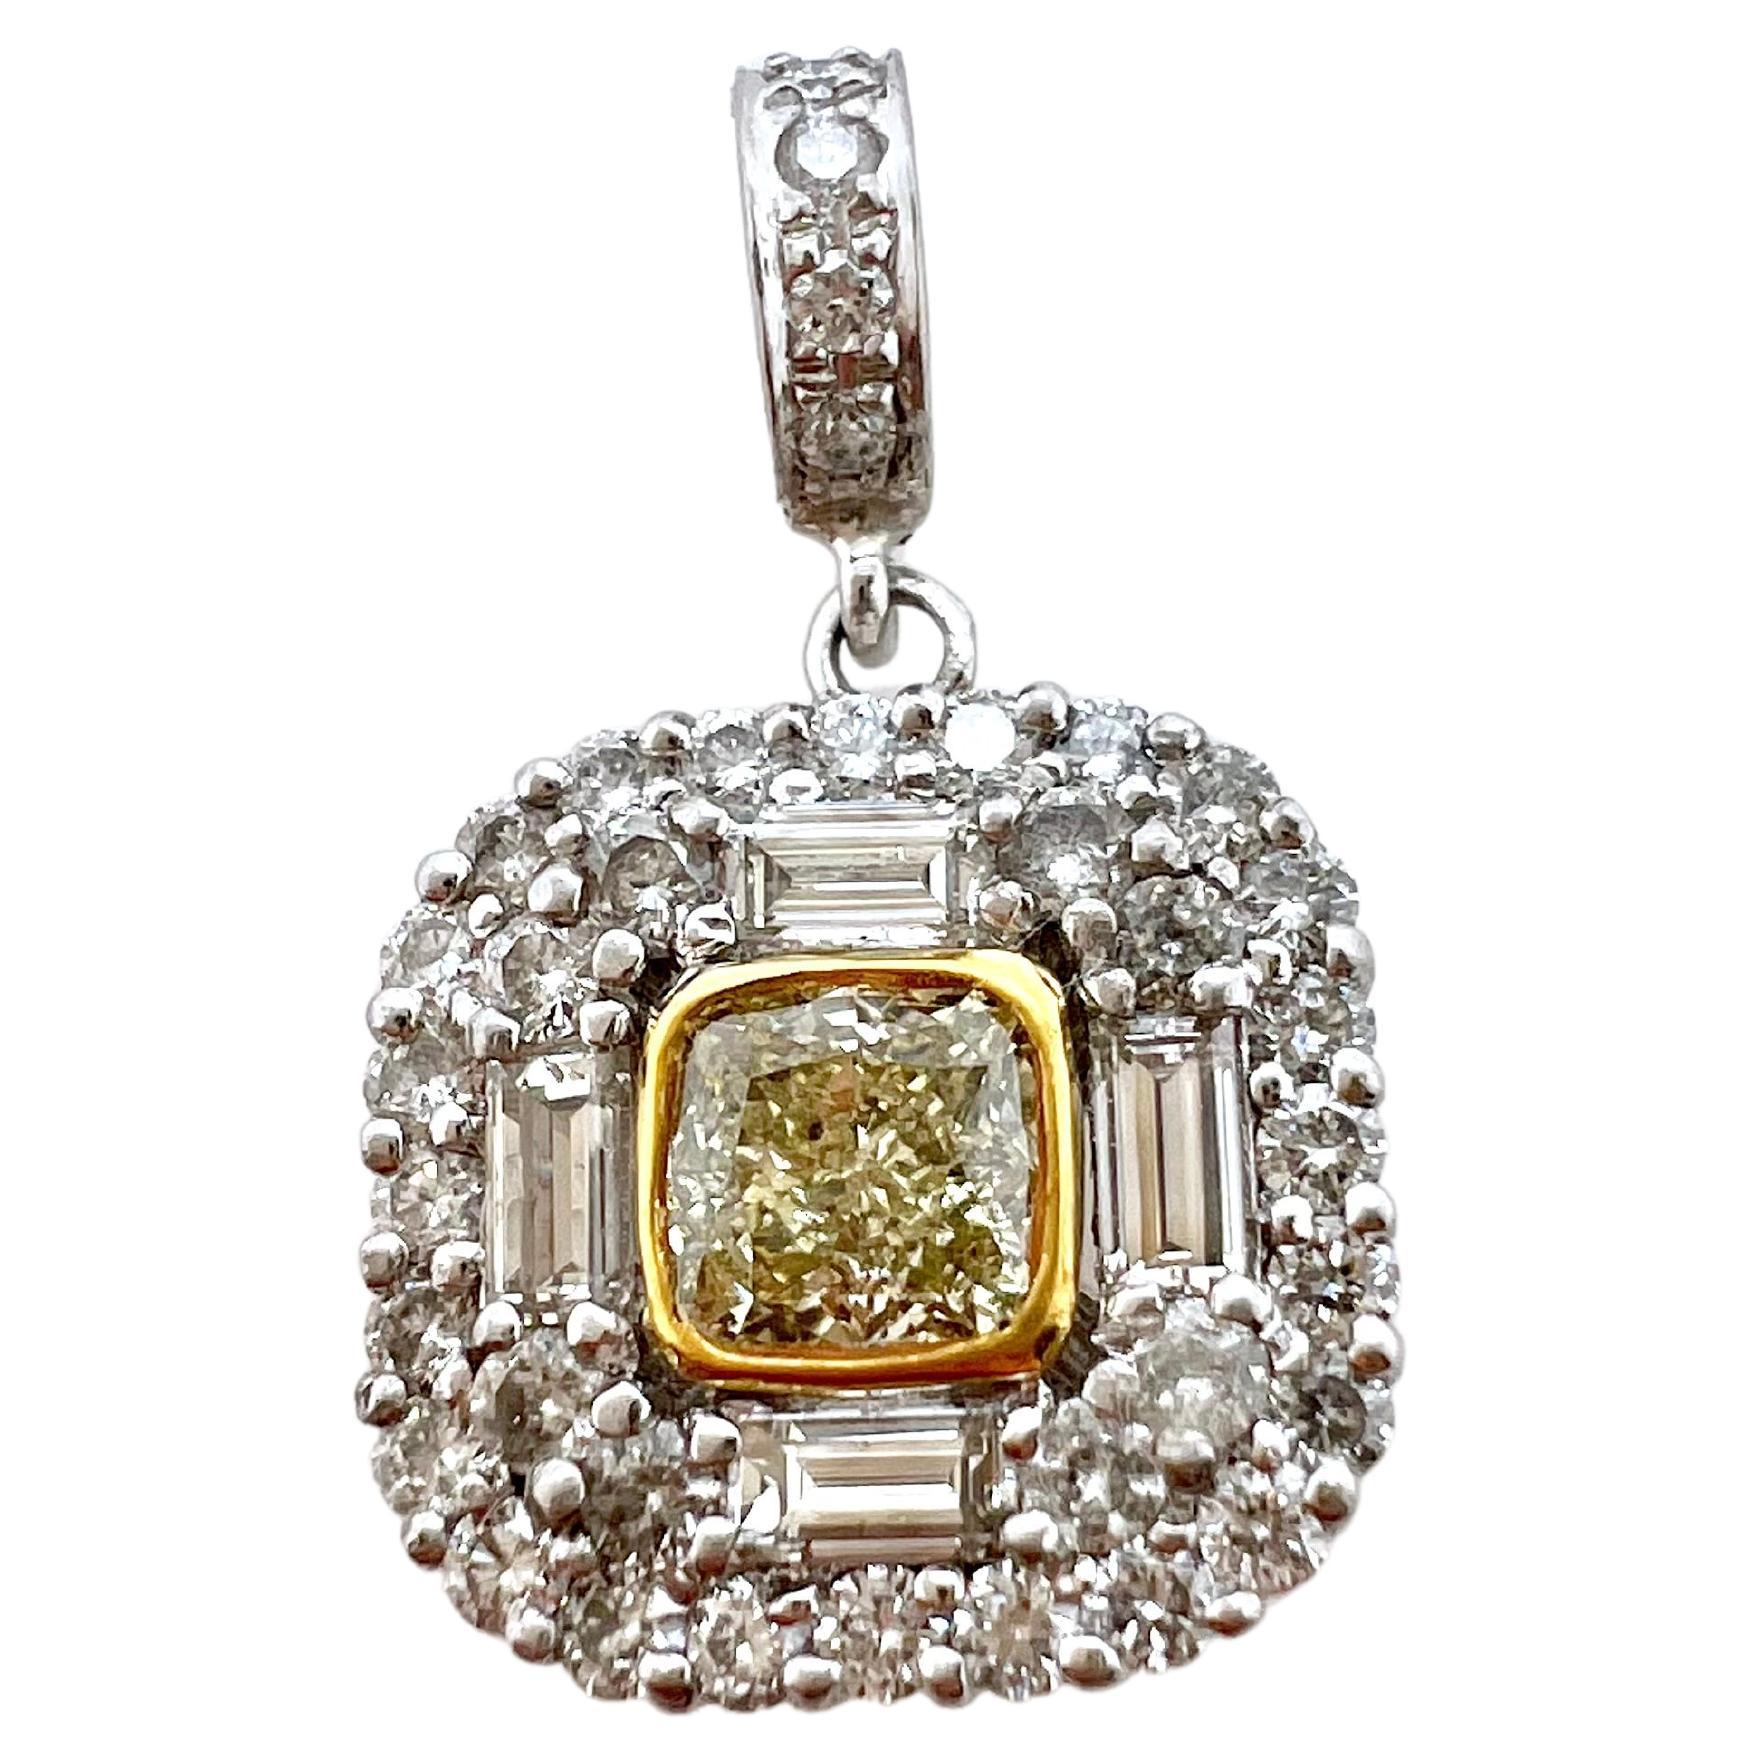 This exquisite yellow diamond in set in an 18k yellow gold bezel setting and is strategically placed within the custom platinum setting with round brilliant and baguette diamonds.  It hangs off a 18k yellow gold diamond chain with 0.22 ct of round